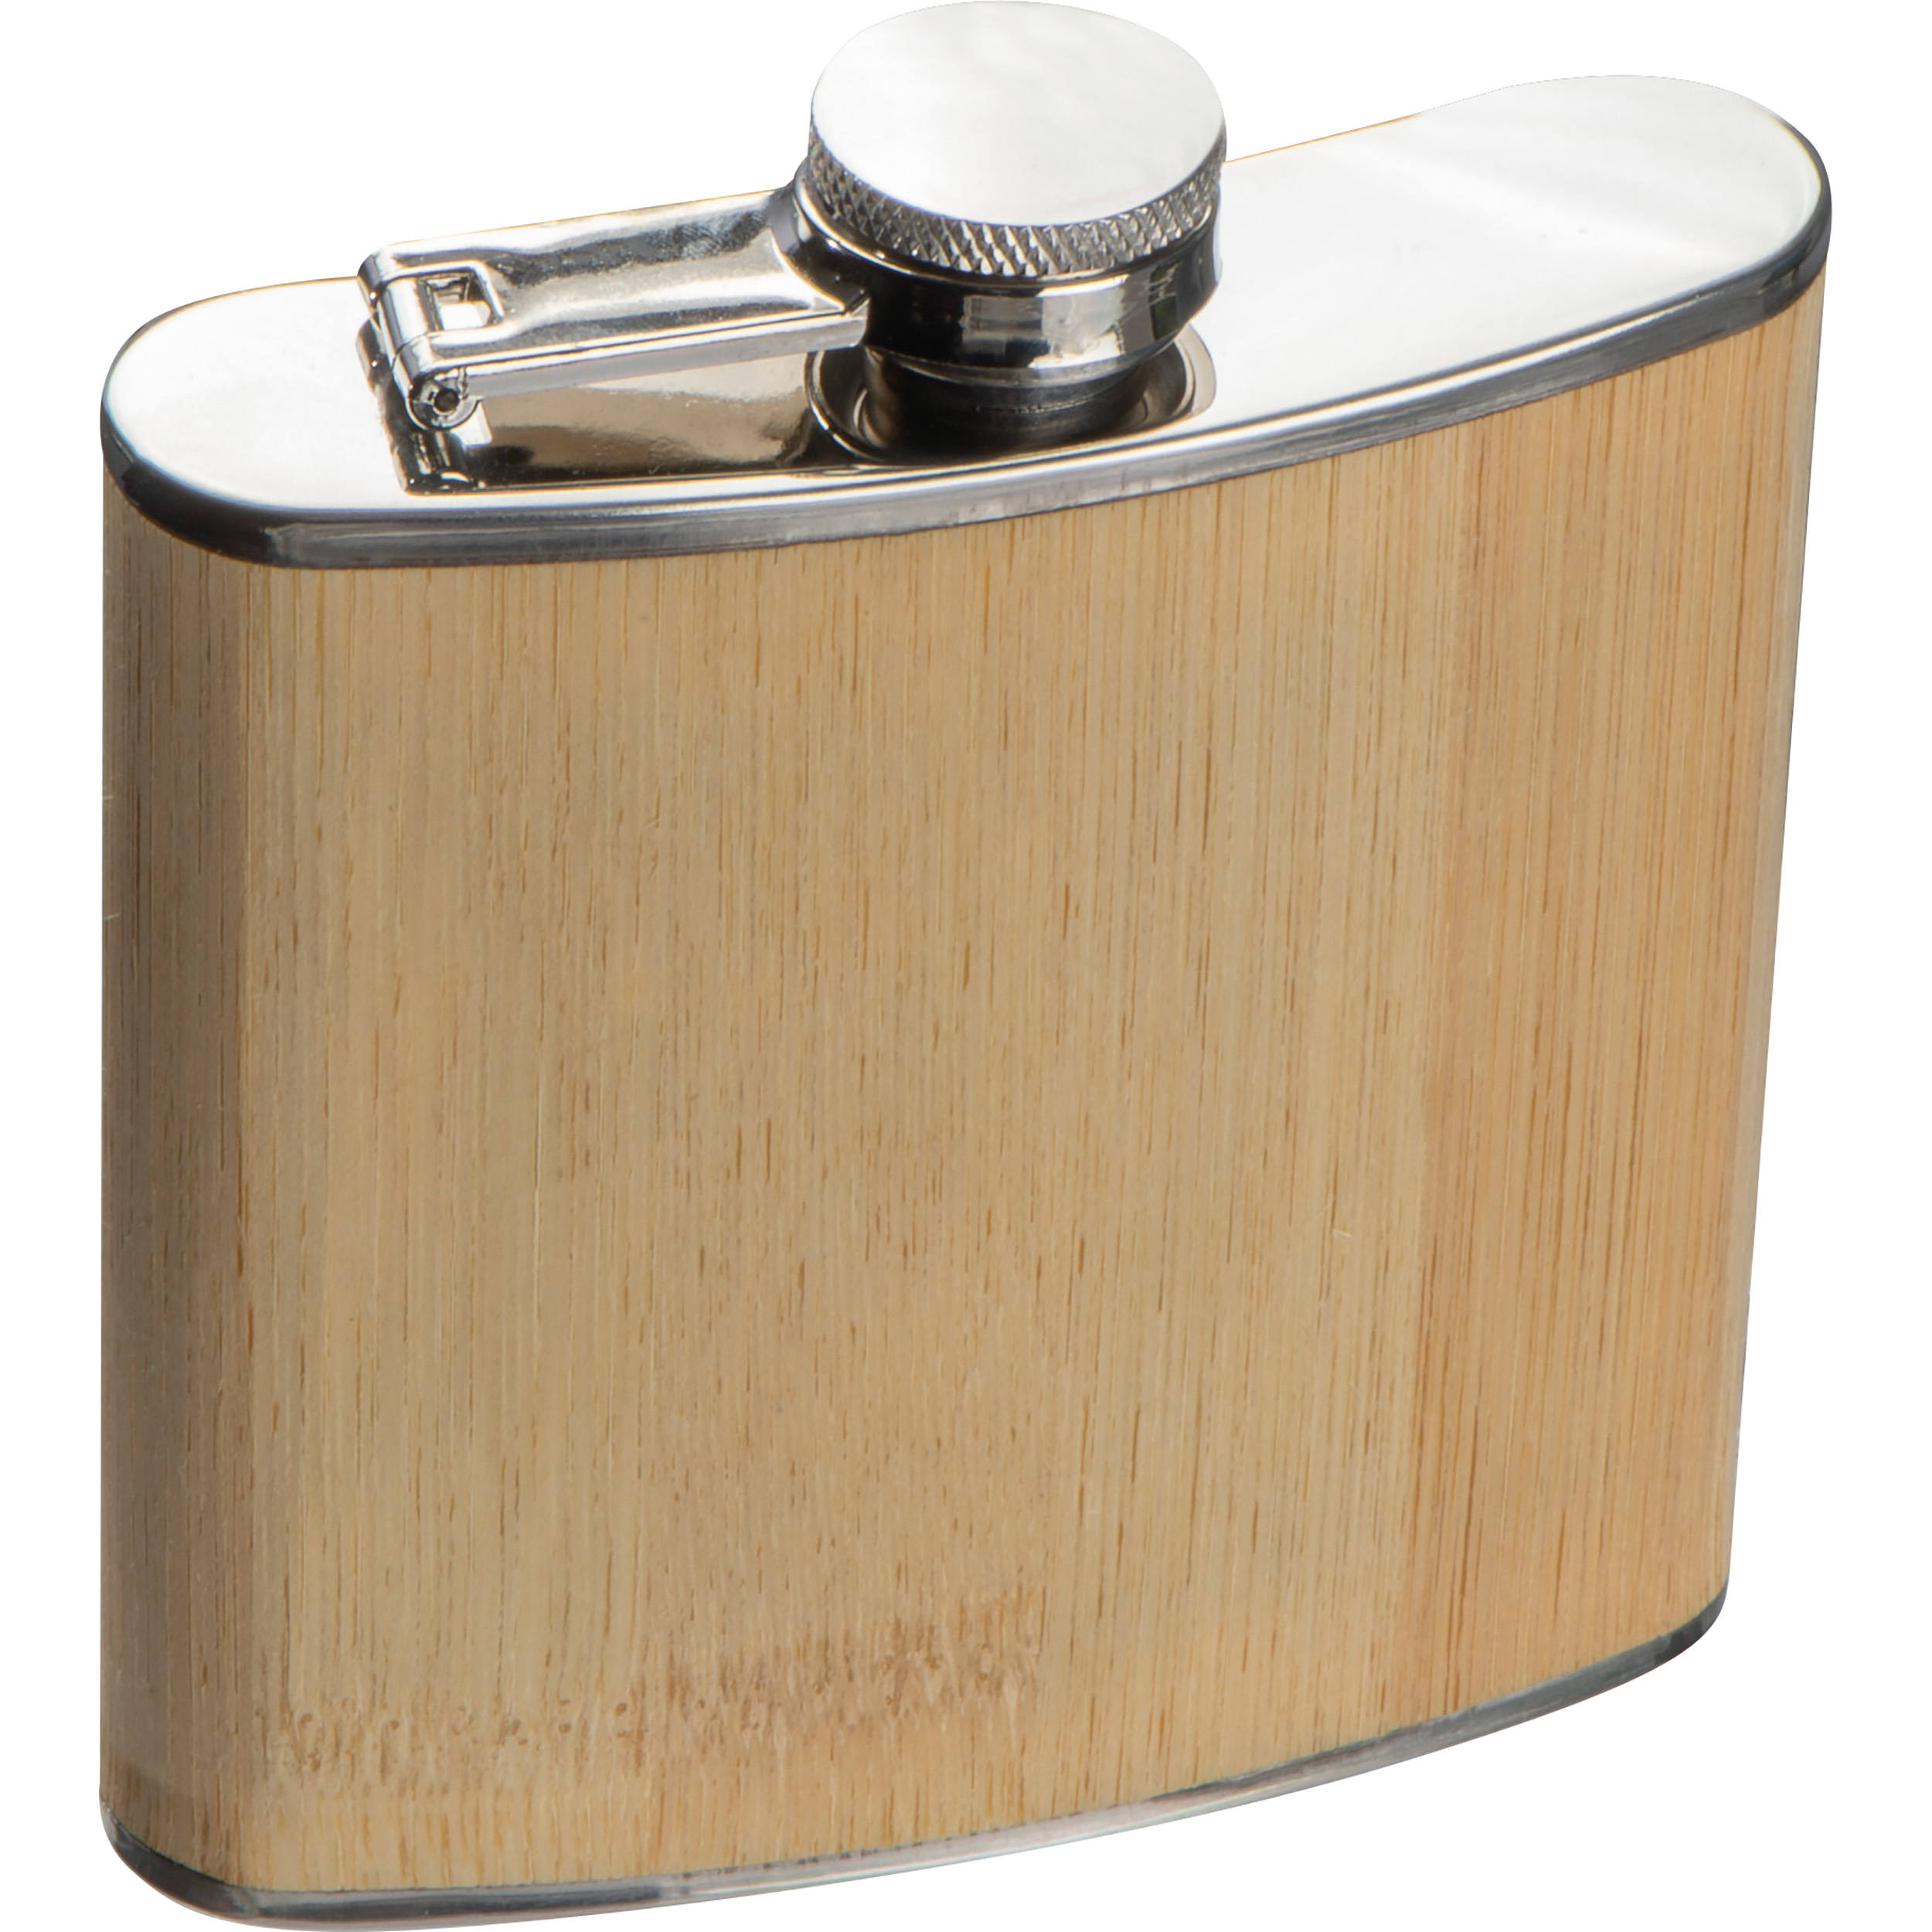 A hip flask with a twist cap made of bamboo - Upper Slaughter - St Albans